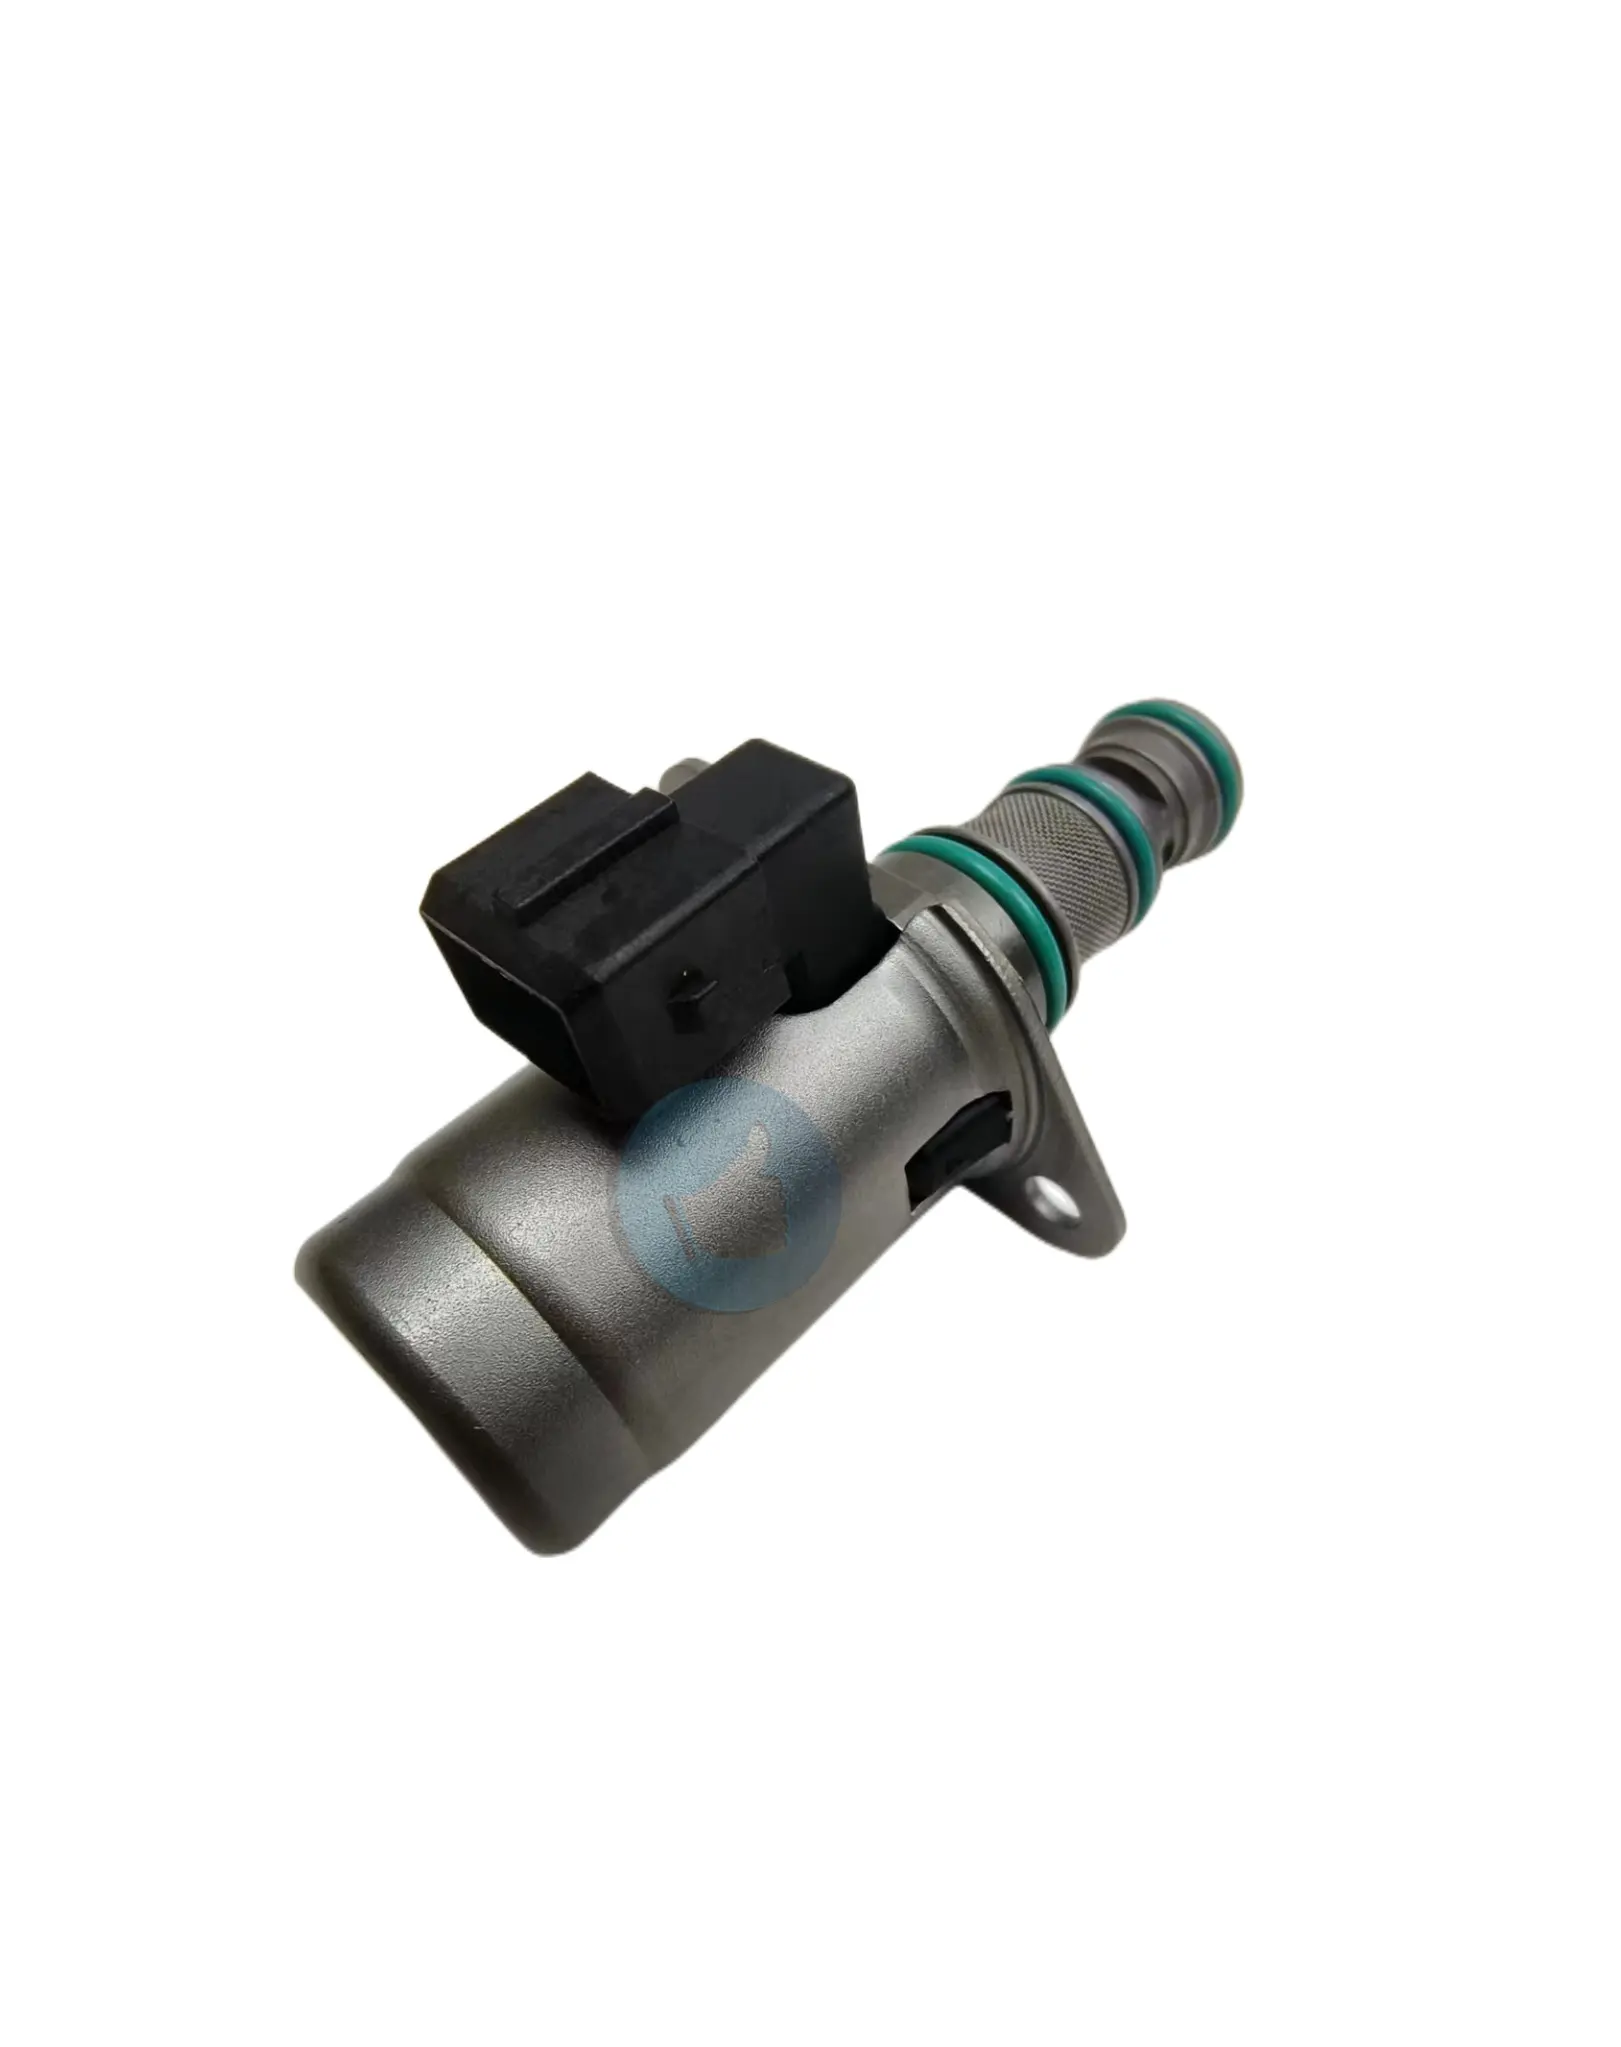 Hydraulic solenoid valve 31765-FC000 31765FC000 is suitable for Nissan 1F2 1F20-30 forklift